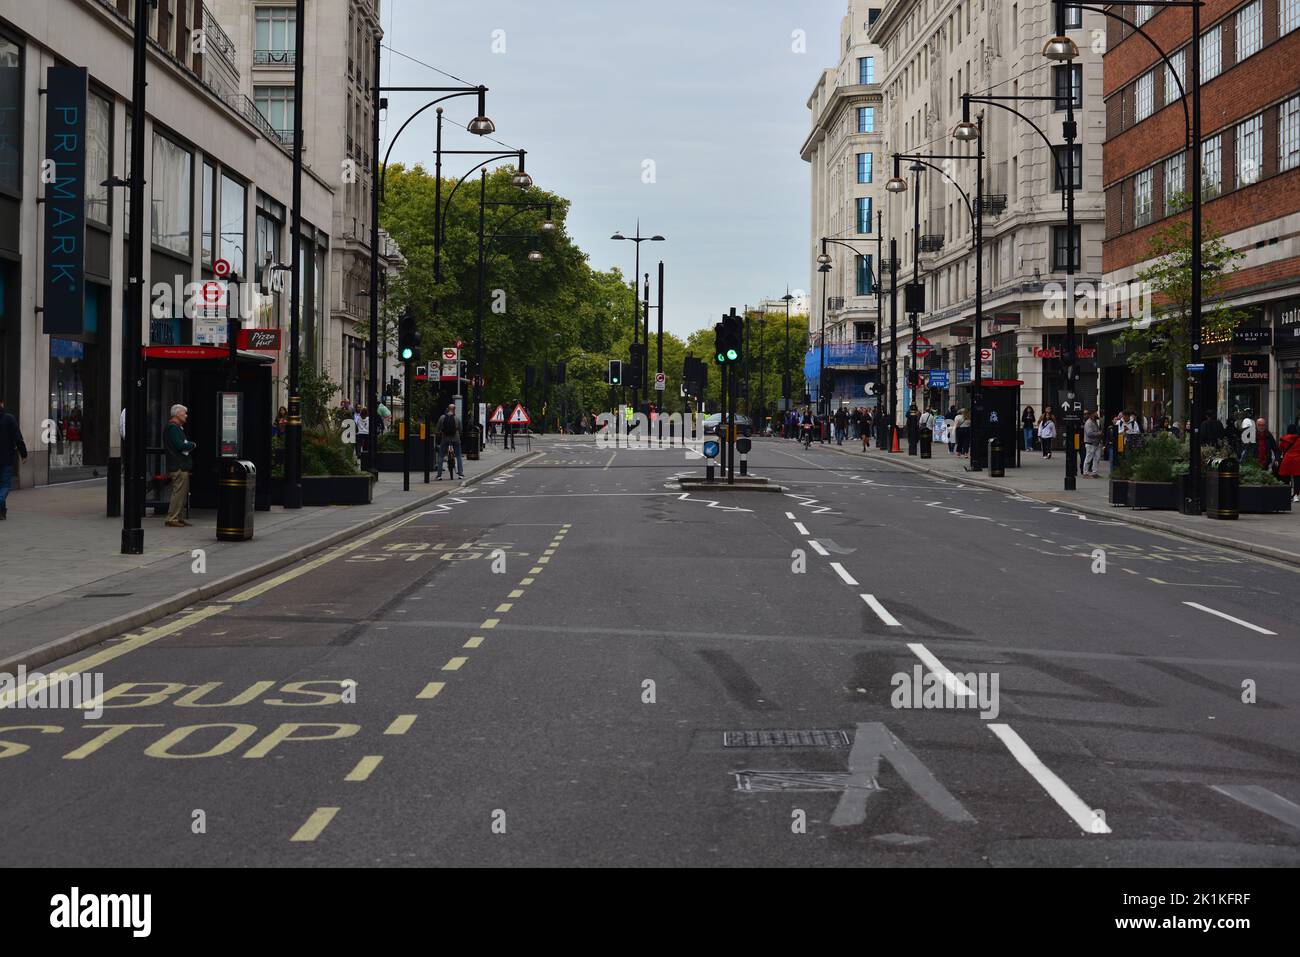 State funeral of Her Majesty Queen Elizabeth II, London, UK, Monday 19th September 2022. Oxford Street, empty and traffic free. Stock Photo